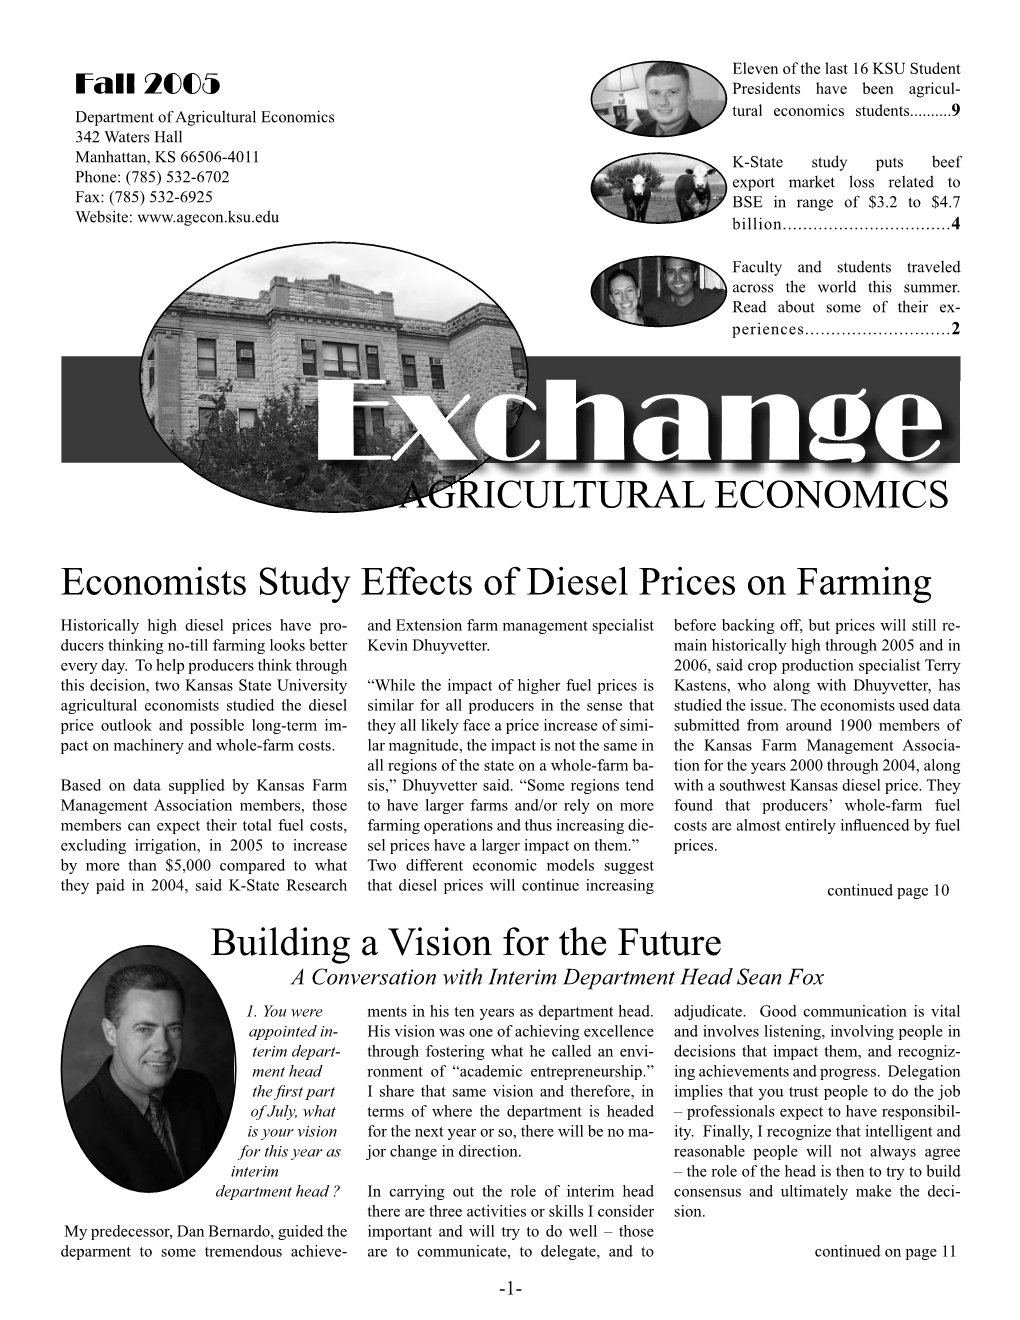 AGRICULTURAL ECONOMICS Building a Vision for the Future Economists Study Effects of Diesel Prices on Farming